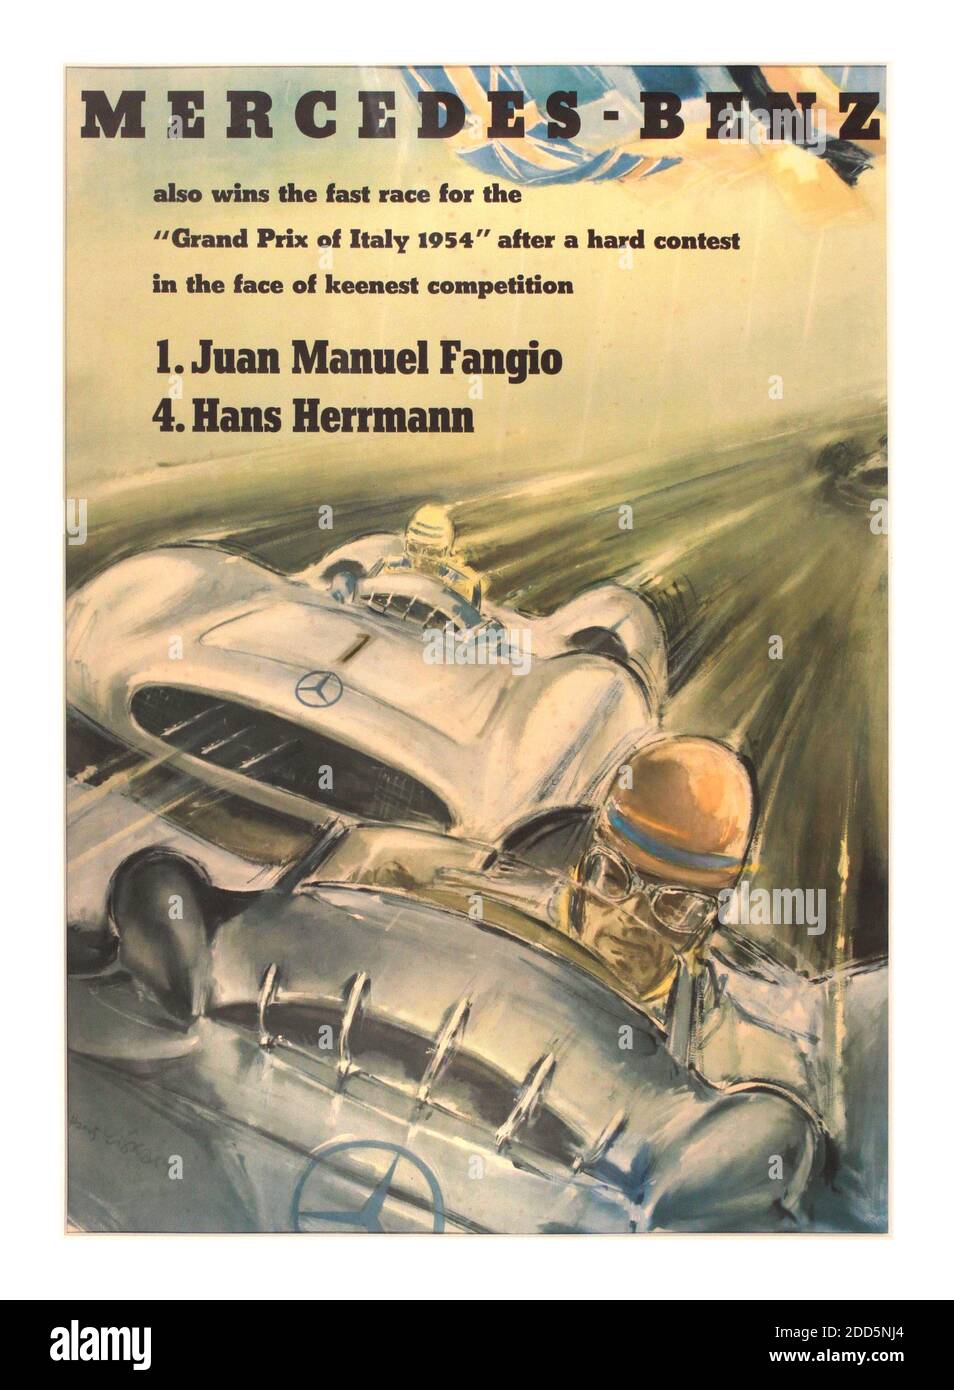 Vintage 1954 Mercedes-Benz poster for Italian Grand Prix,  1.Juan Manuel Fangio, 4.Hans Hermann, original poster printed In West Germany 1954 by Hans Liska (1907-1983) The 1954 Italian Grand Prix was a Formula One motor race held on 5 September 1954 at Monza. It was race 8 of 9 in the 1954 World Championship of Drivers. The 80-lap race was won by Mercedes driver Juan Manuel Fangio after he started from pole position. Mike Hawthorn finished second for the Ferrari team and his teammates Umberto Maglioli and José Froilán González came in third. Hans Herrman driving for Mercedes came 4th Stock Photo